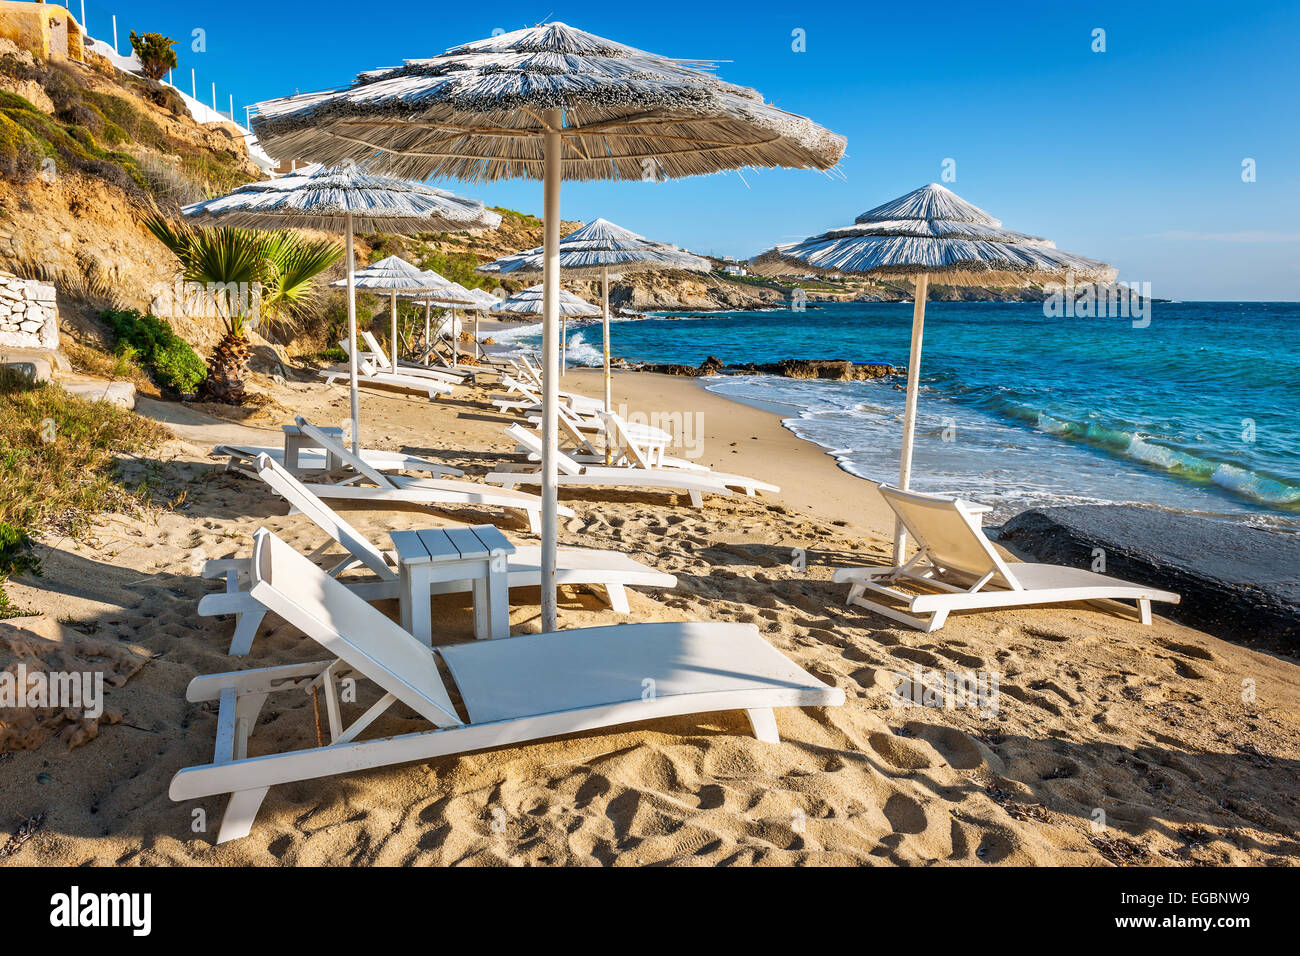 Loungers and parasols on little beach in Mykonos, Greece, Europe Stock Photo